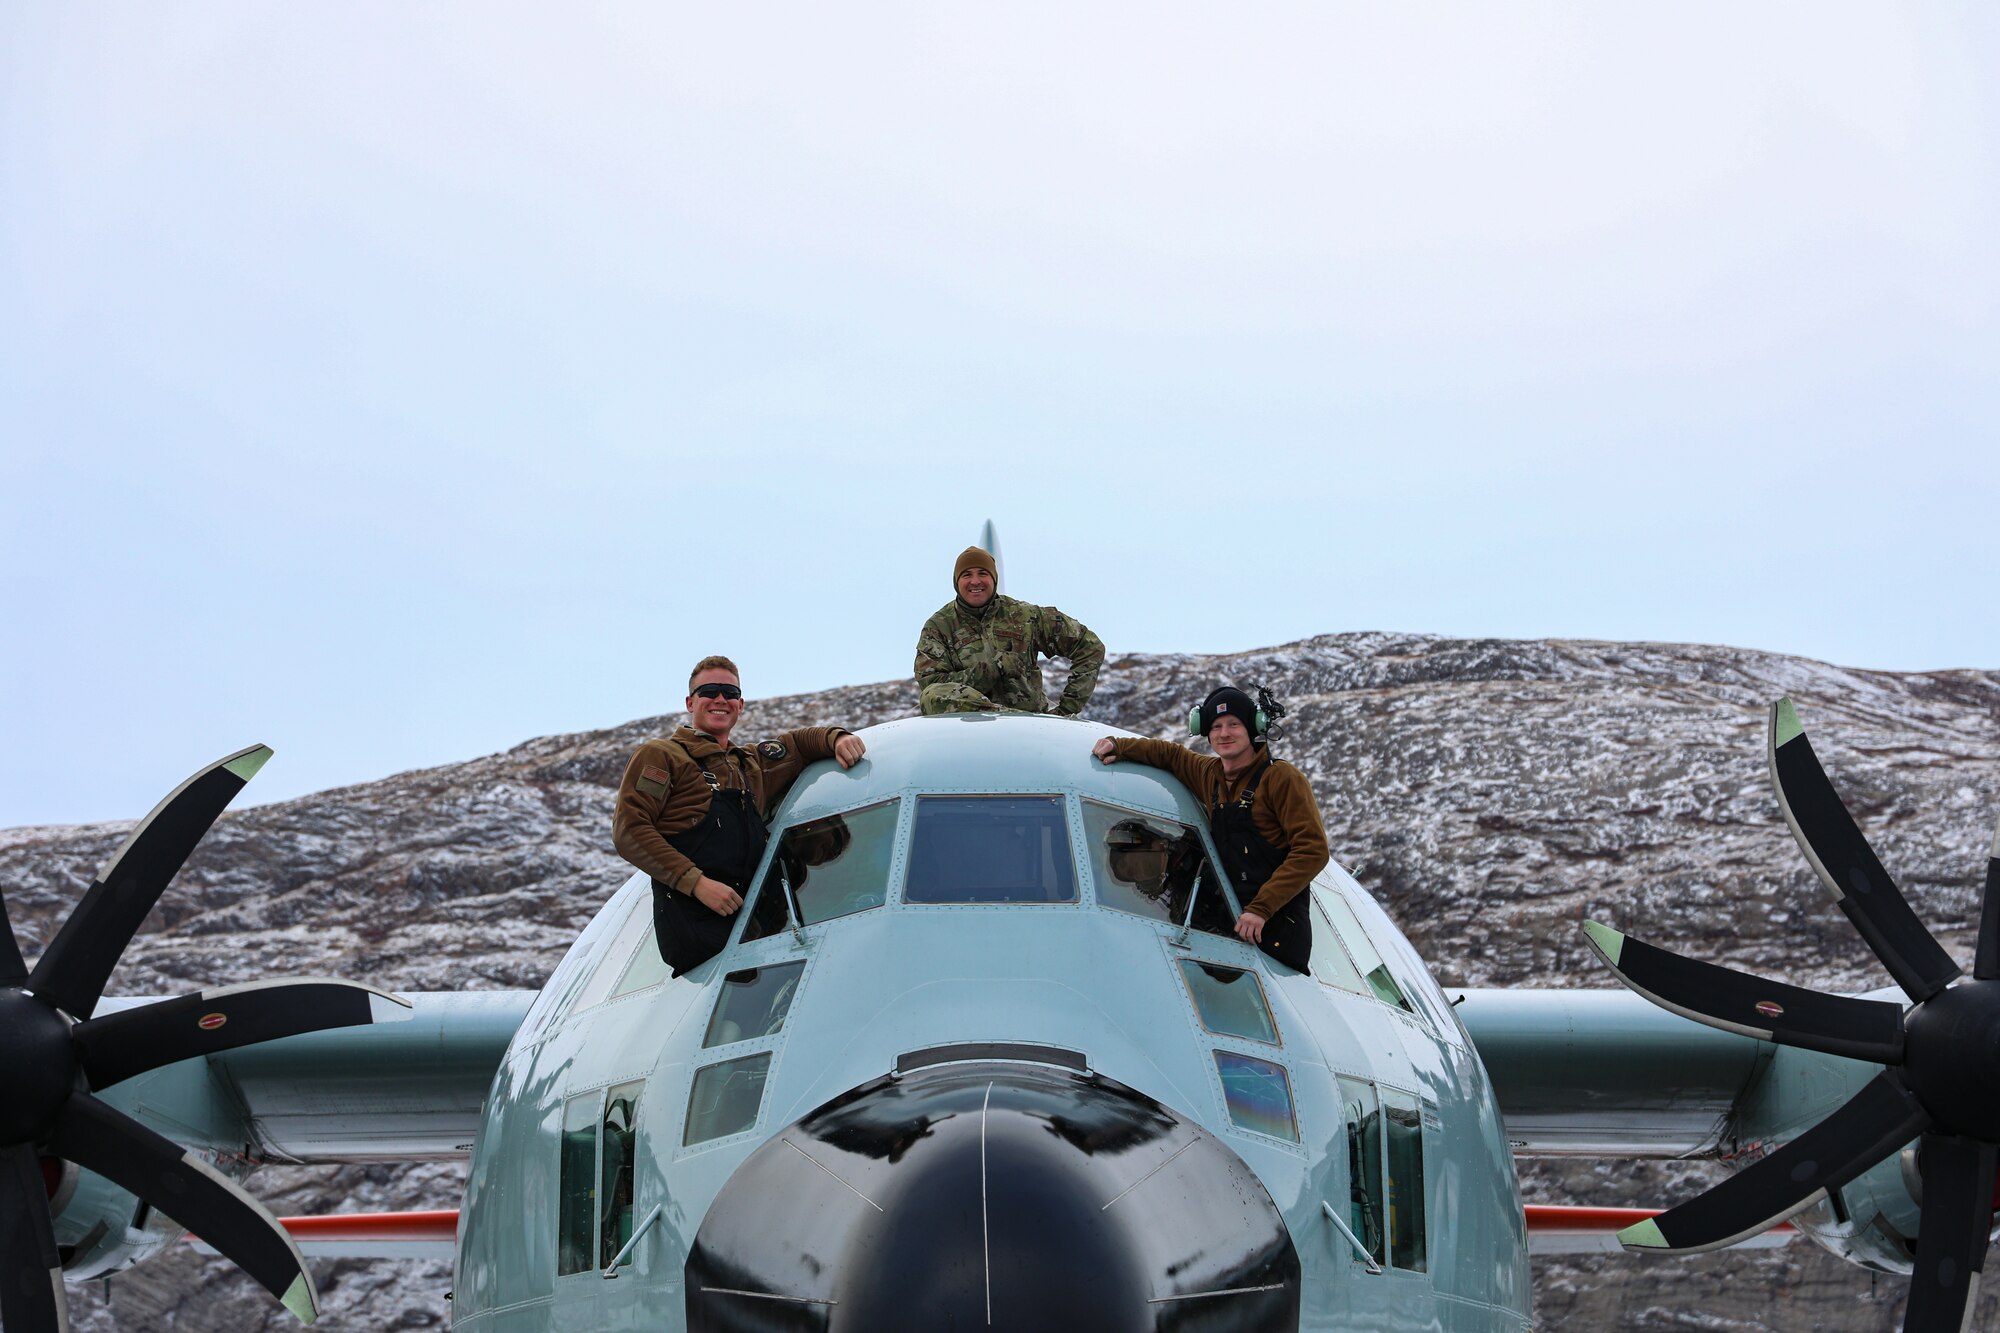 Airmen assigned to the 109th airlift Wing pose for a photo on top of an LC-130 “ski bird” while preparing for an airdrop mission in support of the Danish military during Operation Arctic Light Nov. 4, in Kangerlussuaq, Greenland.